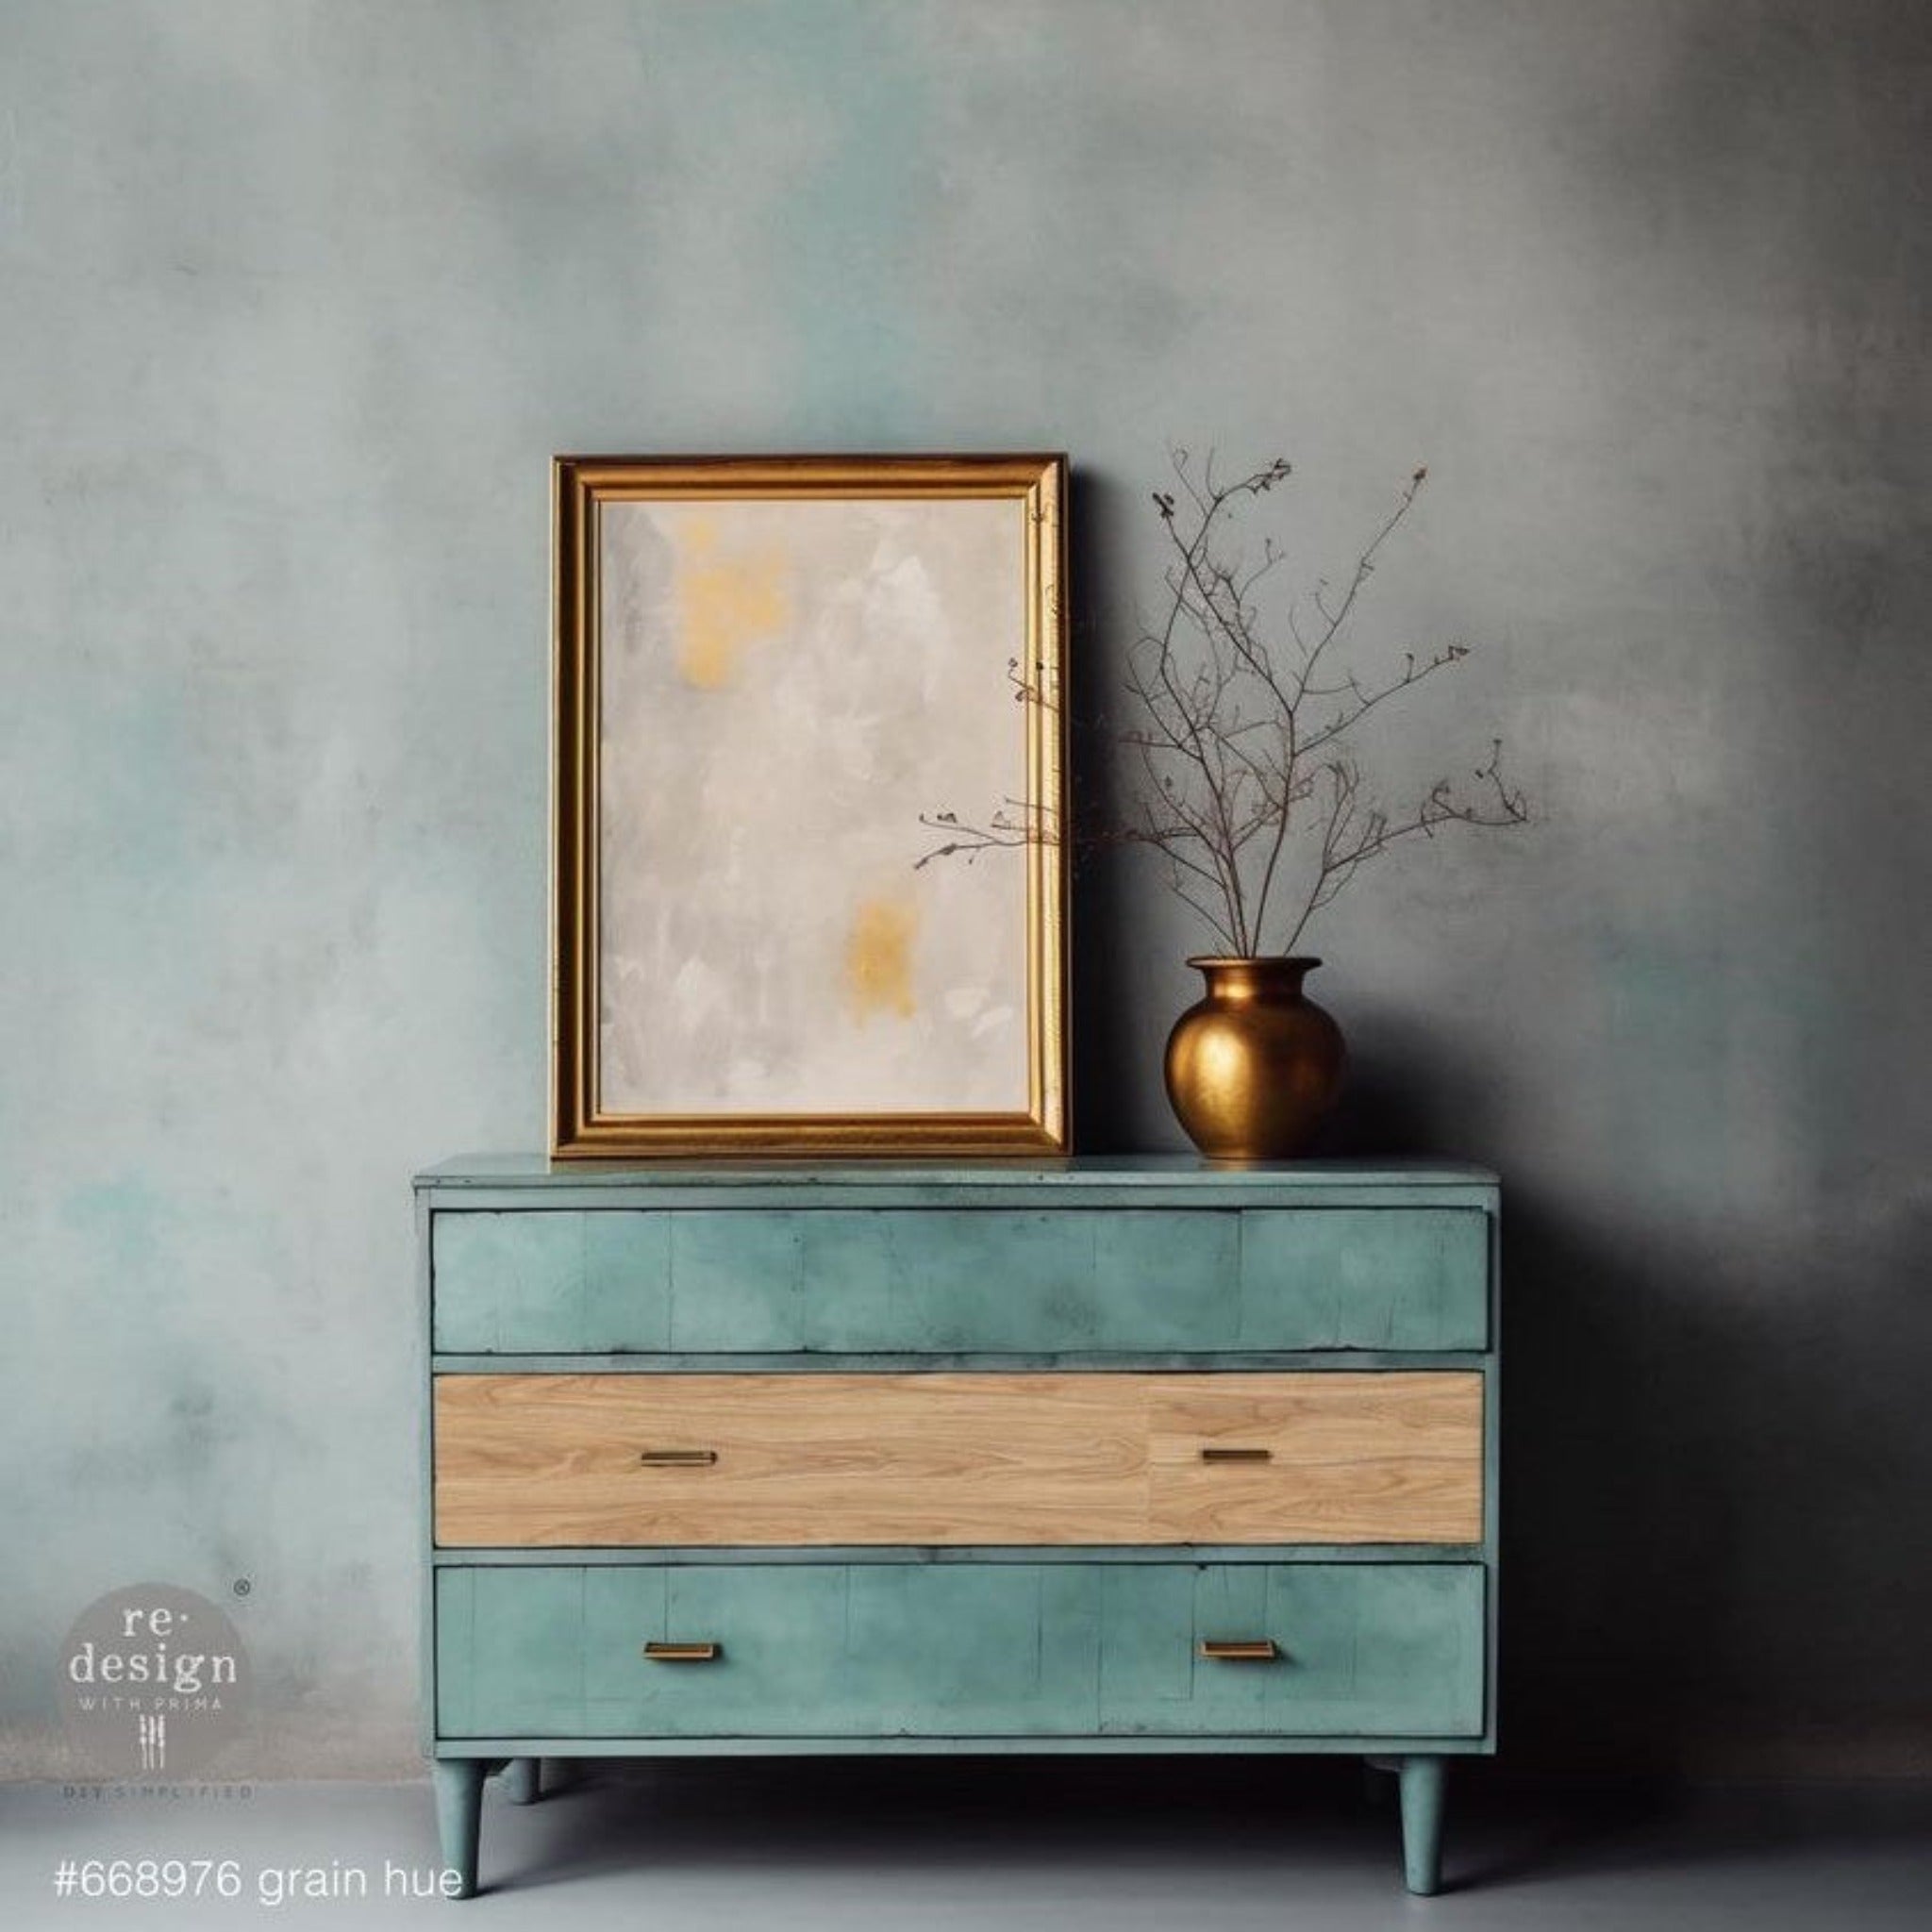 A mid-century 3-drawer dresser is painted light teal and features ReDesign with Prima's Grain Hue A1 fiber paper on the drawer in the middle.